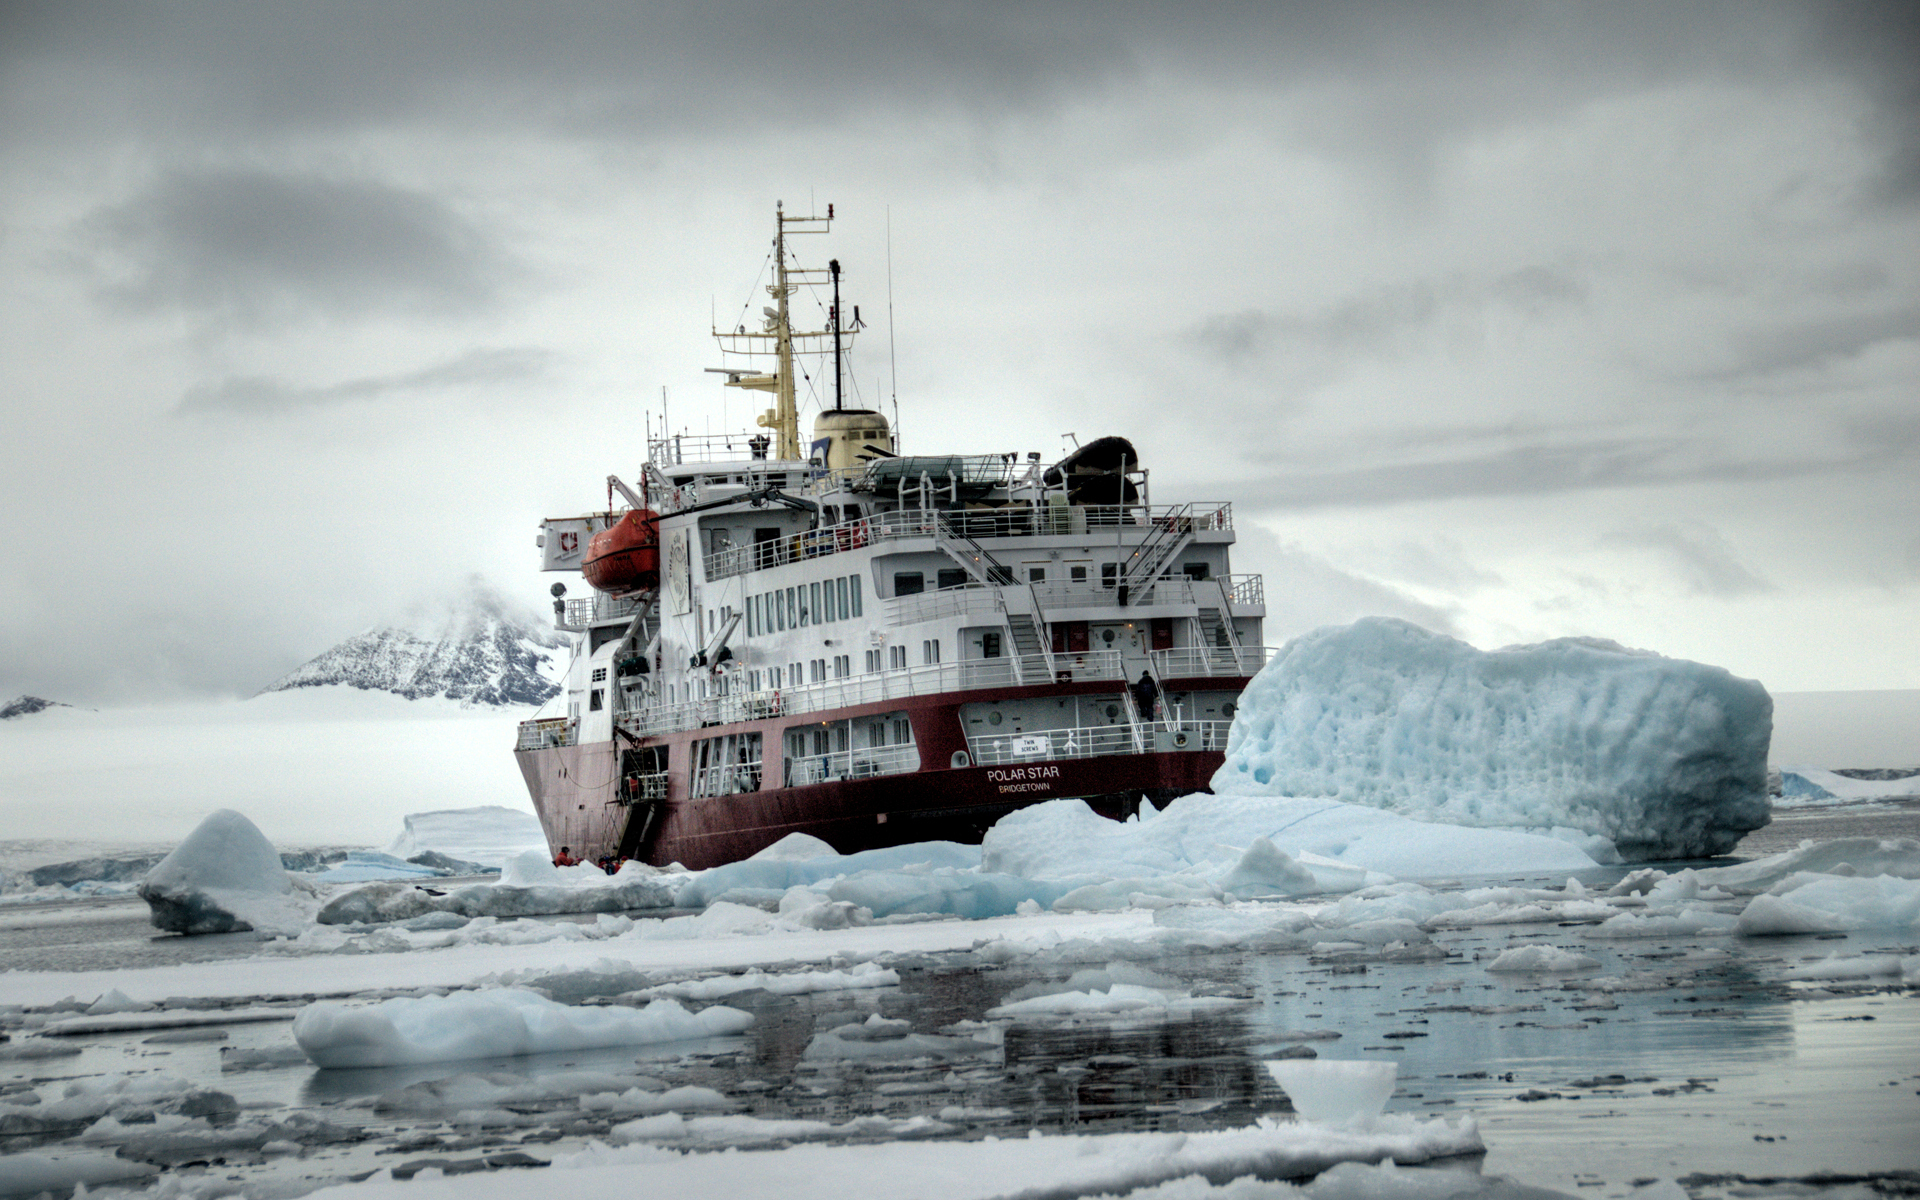 vehicles, Ships, Boats, Artic, Ice, Ocean, Sea, Water, Frozen, Cold, Iceberg, Landscapes, Mountains, Sky, Clouds, Winter, Situation Wallpaper